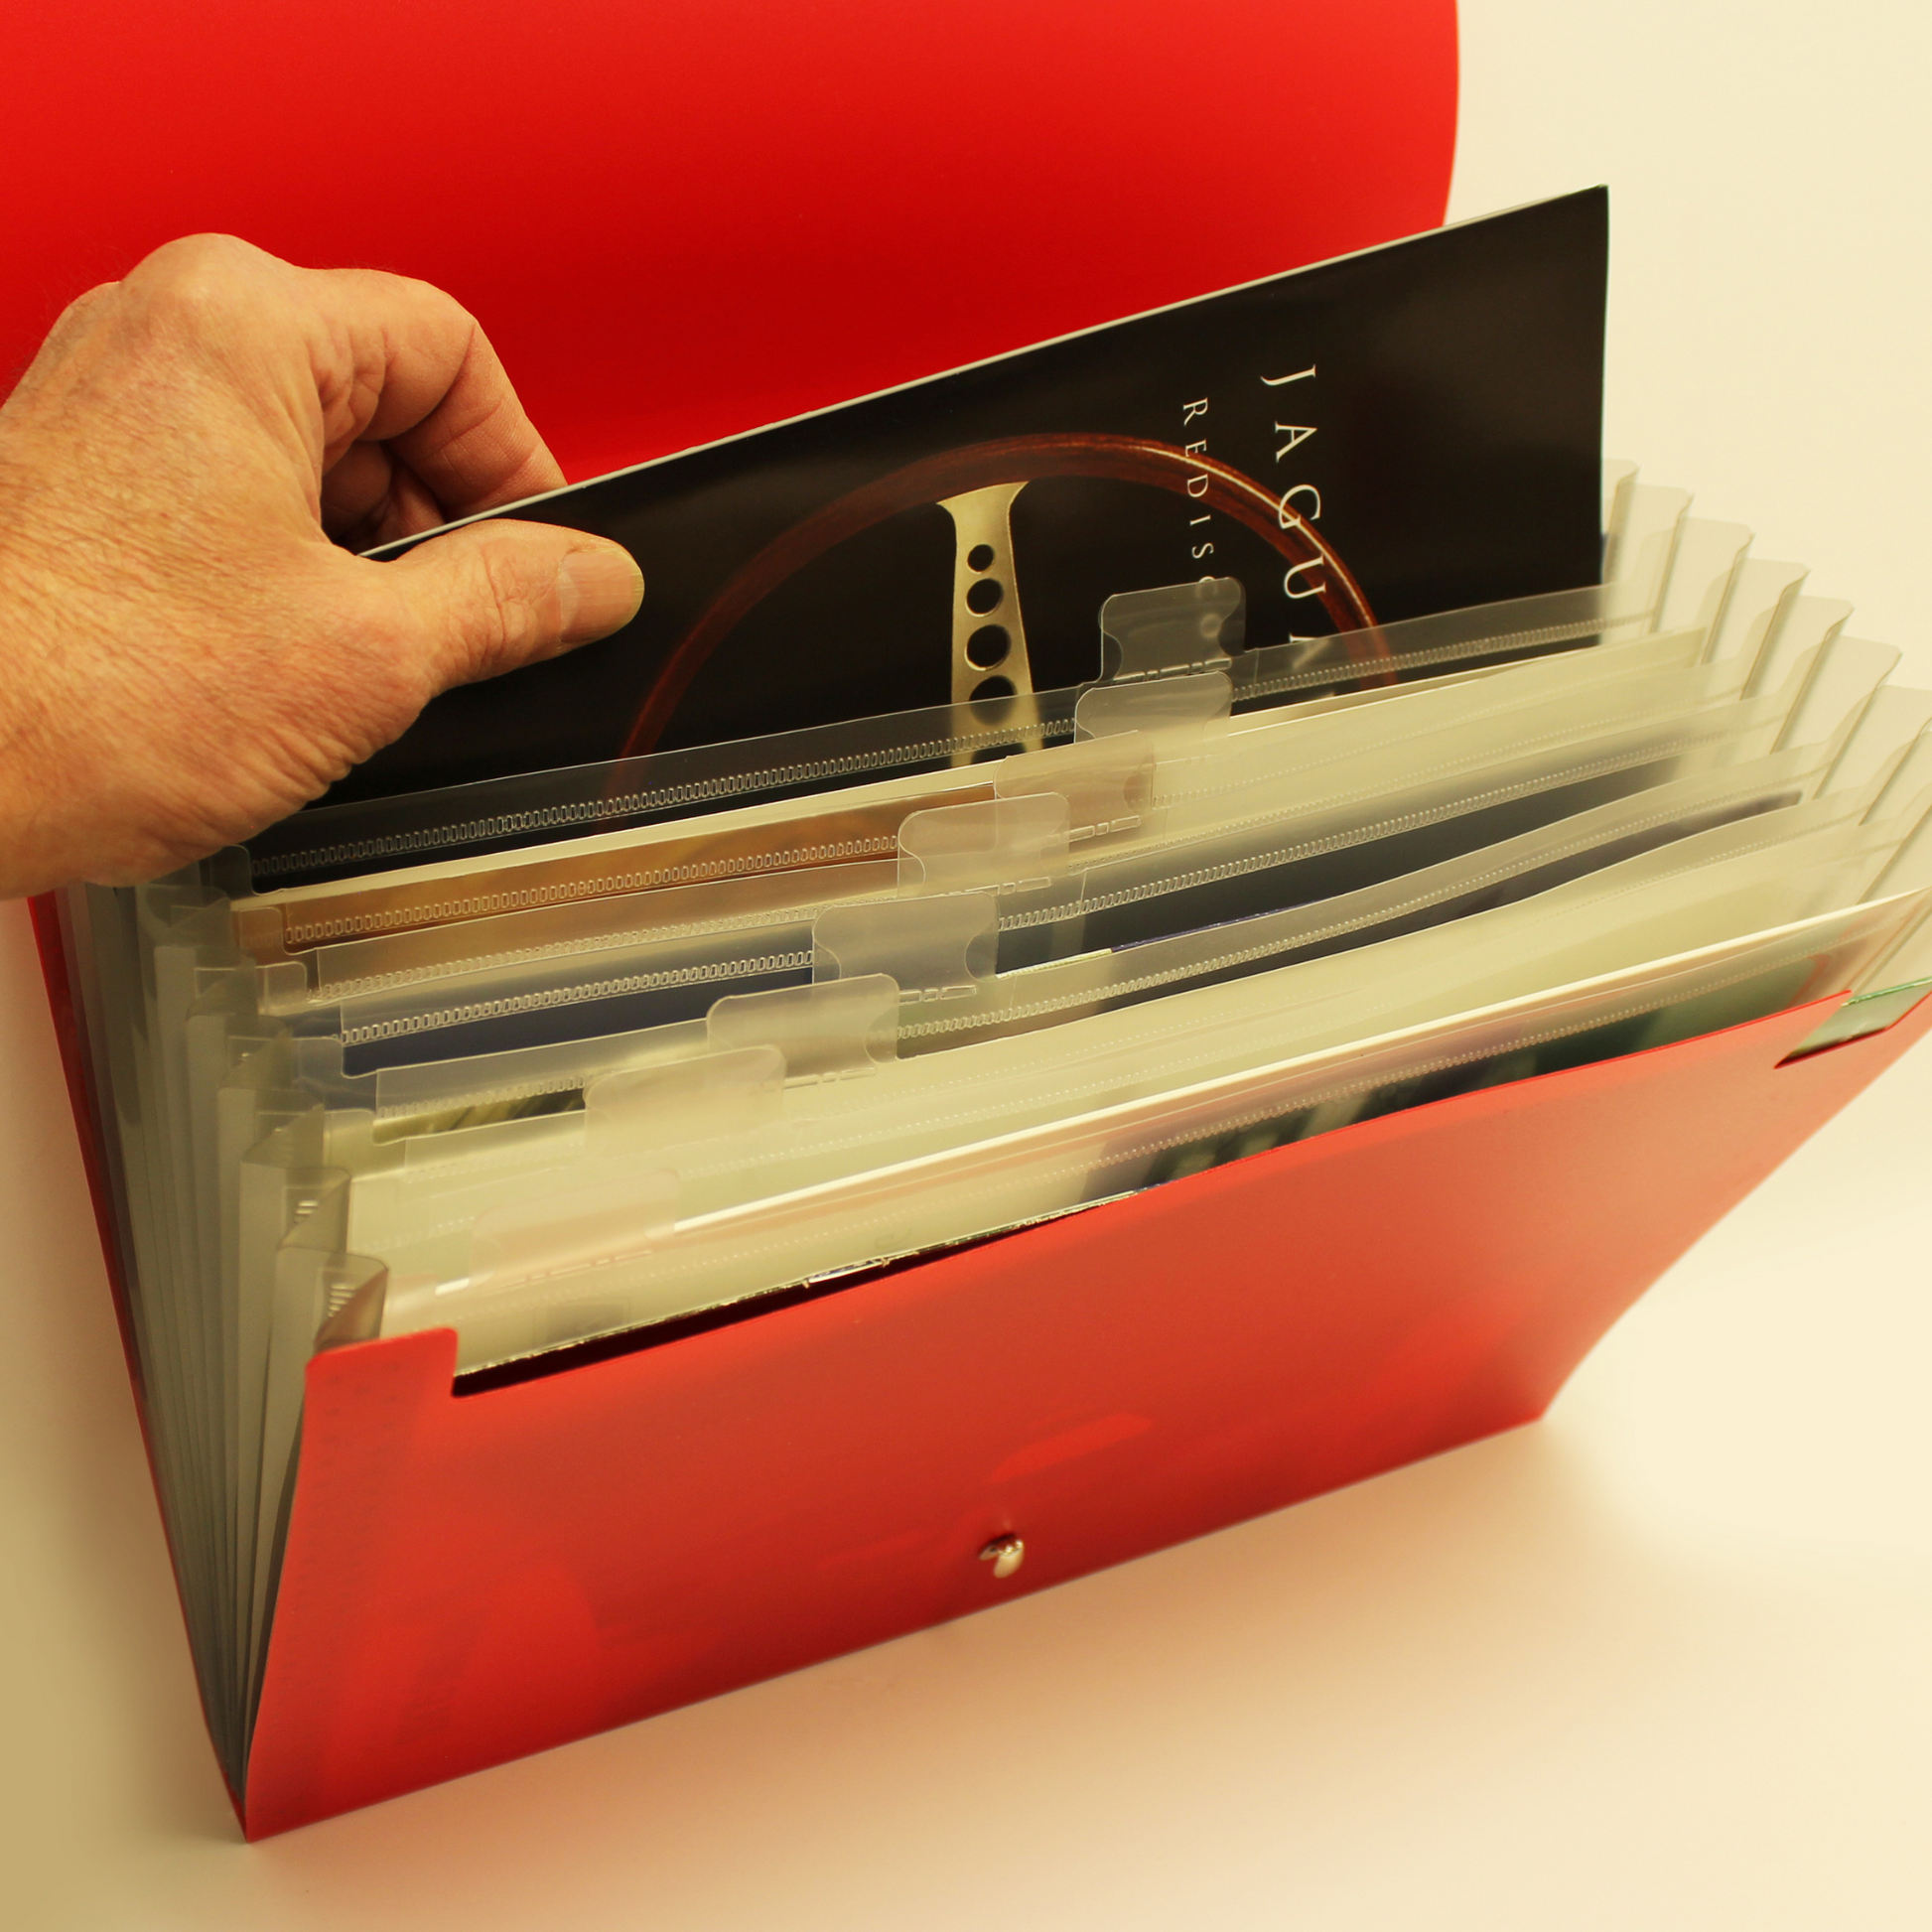 A hand is pulling out a document from a red expanding file organizer with multiple clear dividers and tabs. The visible document has 'JAGUAR' printed on it, suggesting the folder contains professional or automotive-related documents. The organizer is designed for categorization and easy access to contents.